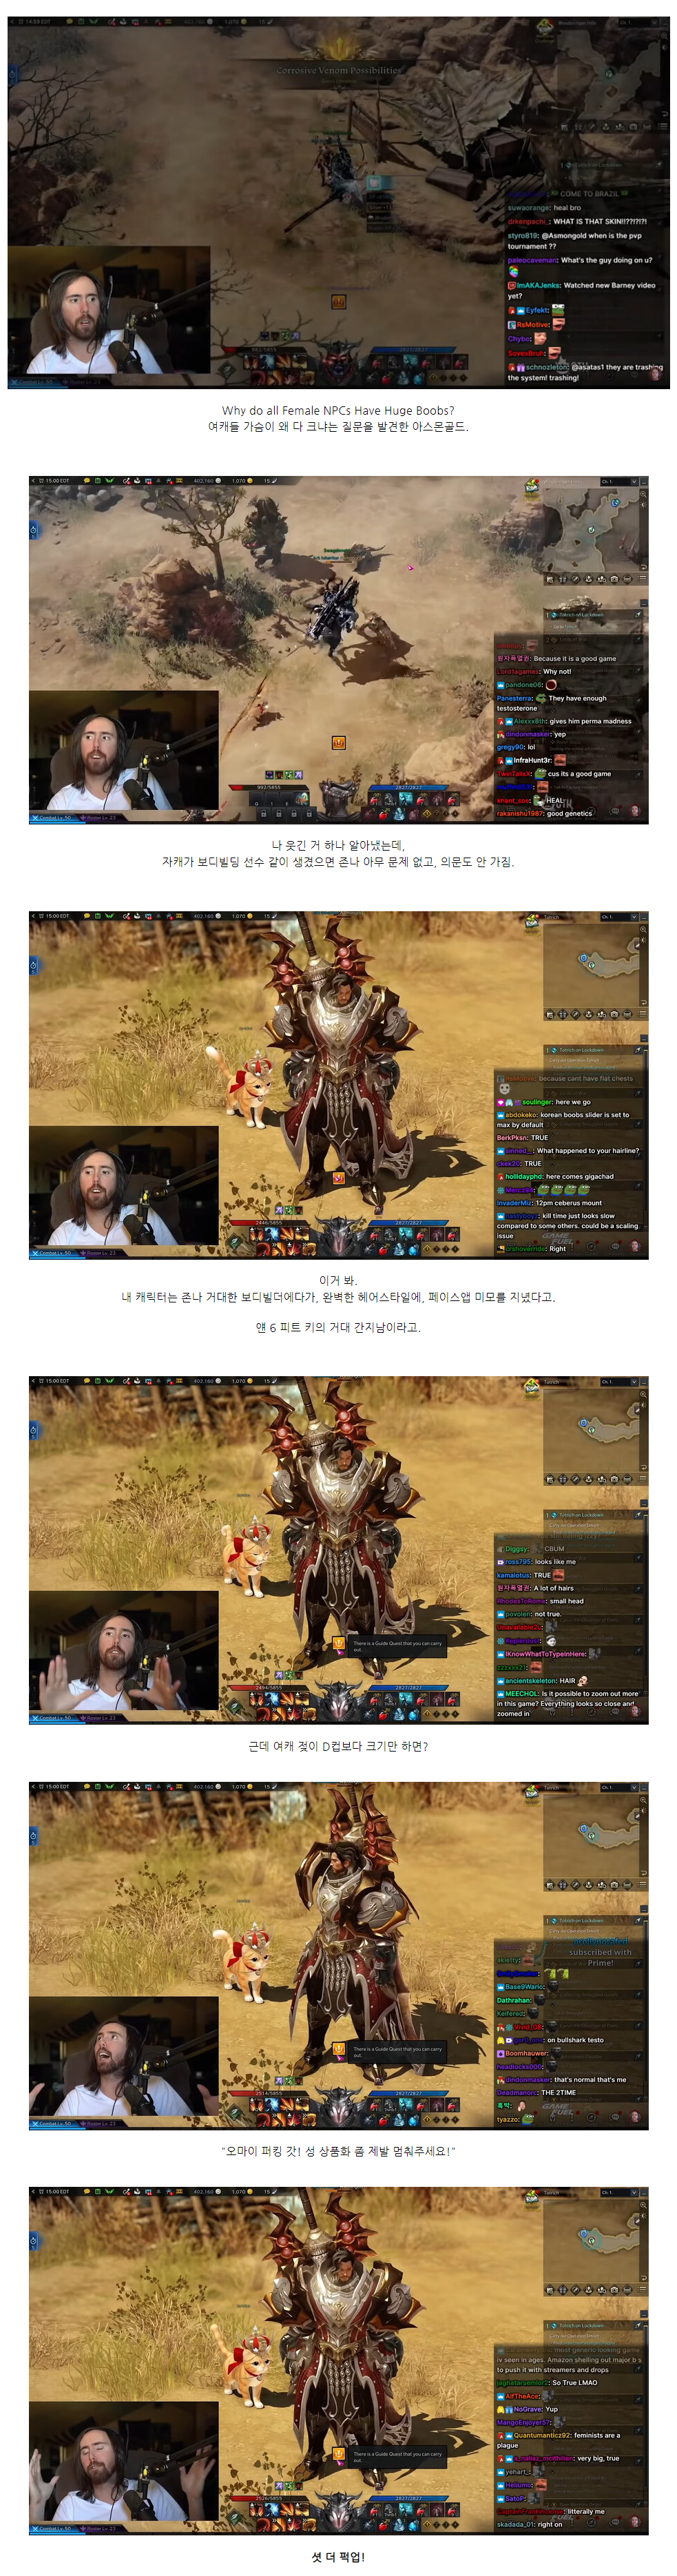 K-A foreigner who learned something while playing online games. JPG.